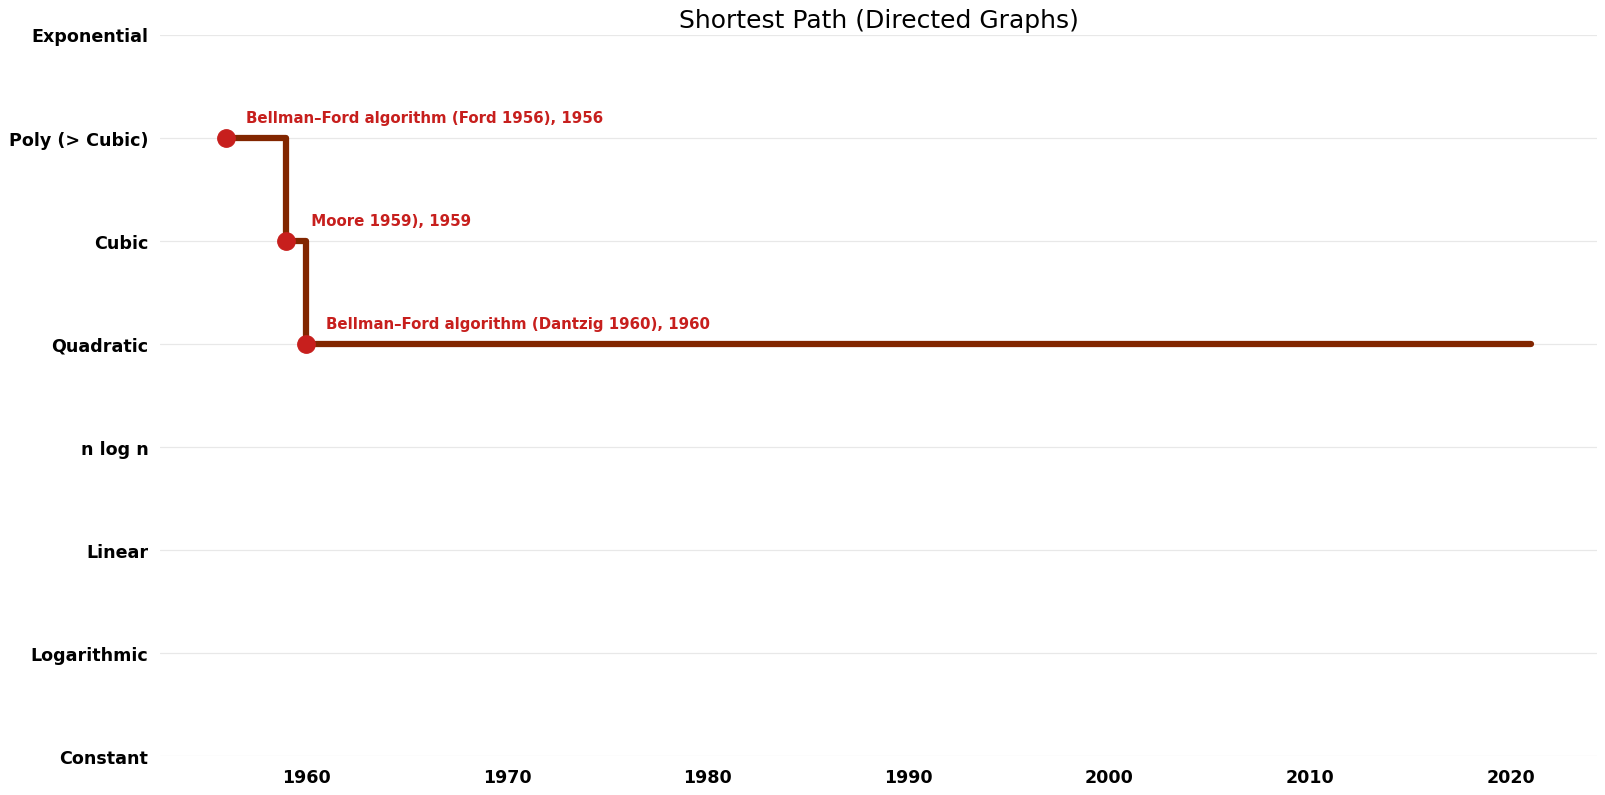 Shortest Path (Directed Graphs) - Time.png